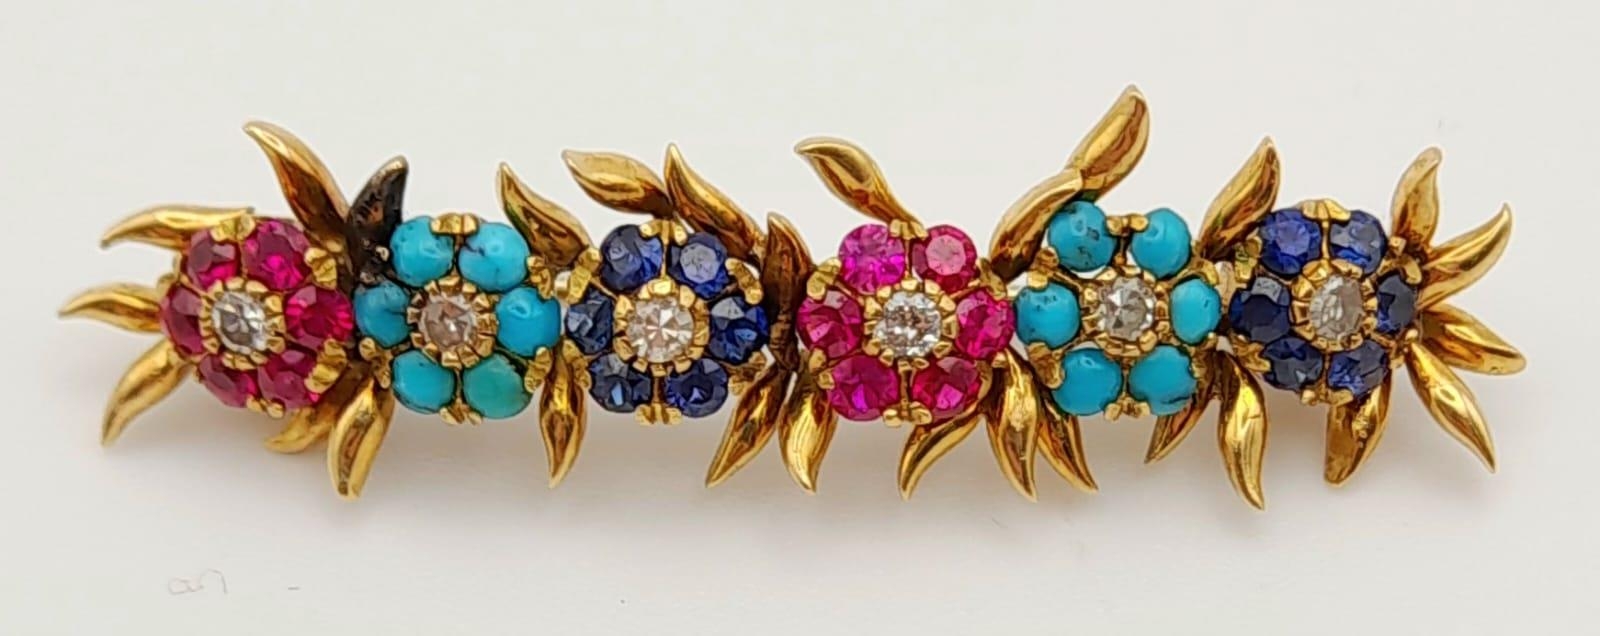 A Beautifully Crafted Antique High Karat Gold, Ruby, Turquoise, Sapphire and Diamond Bar Pin/Brooch.